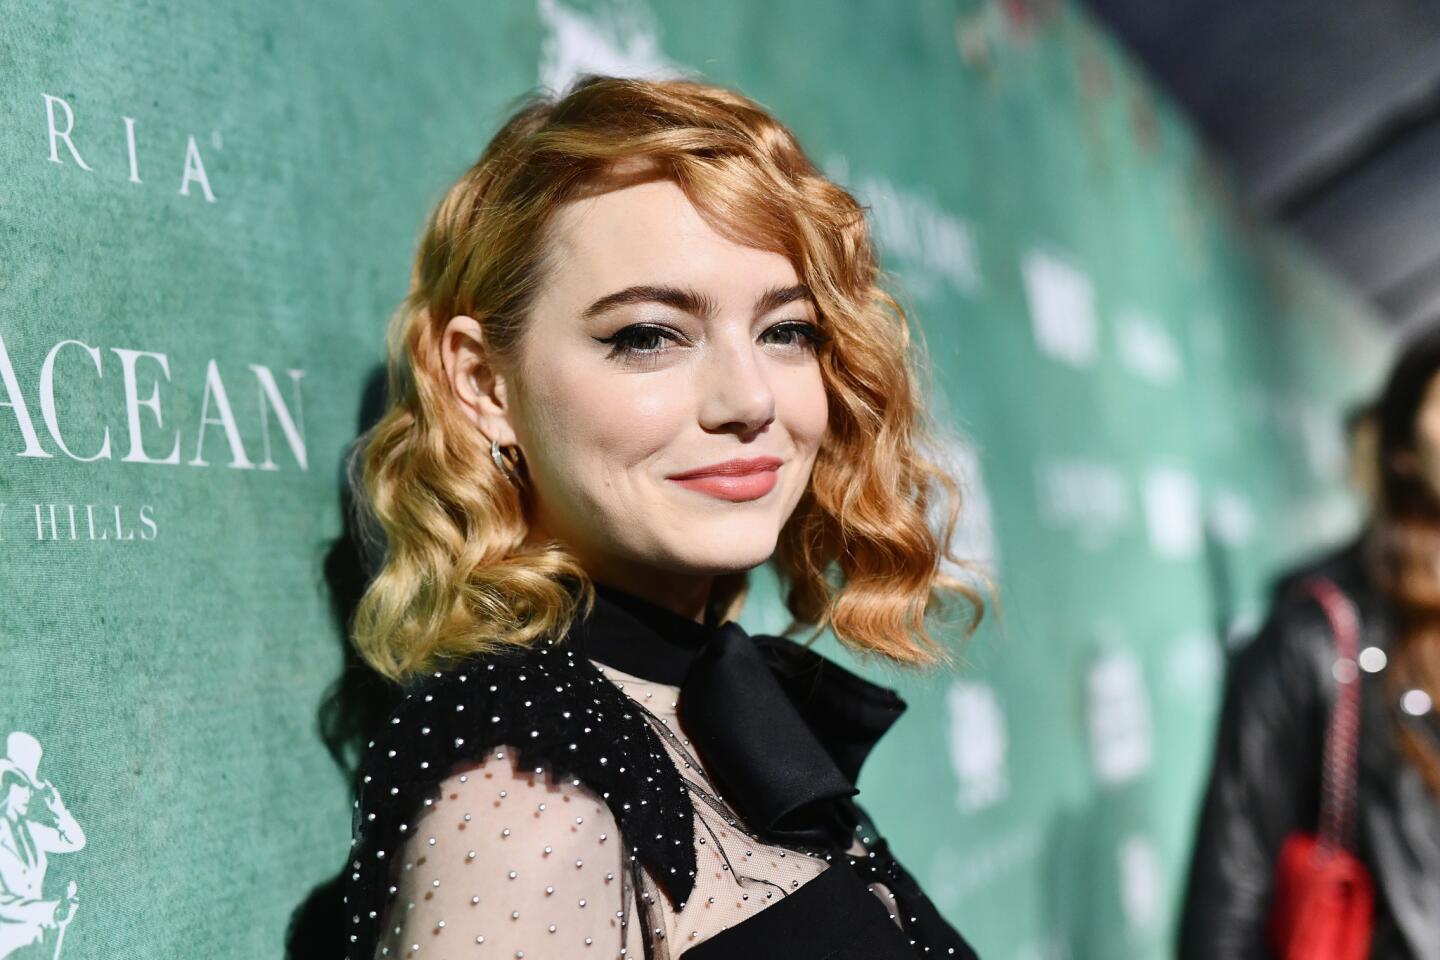 "Battle of the Sexes" actress Emma Stone attends.